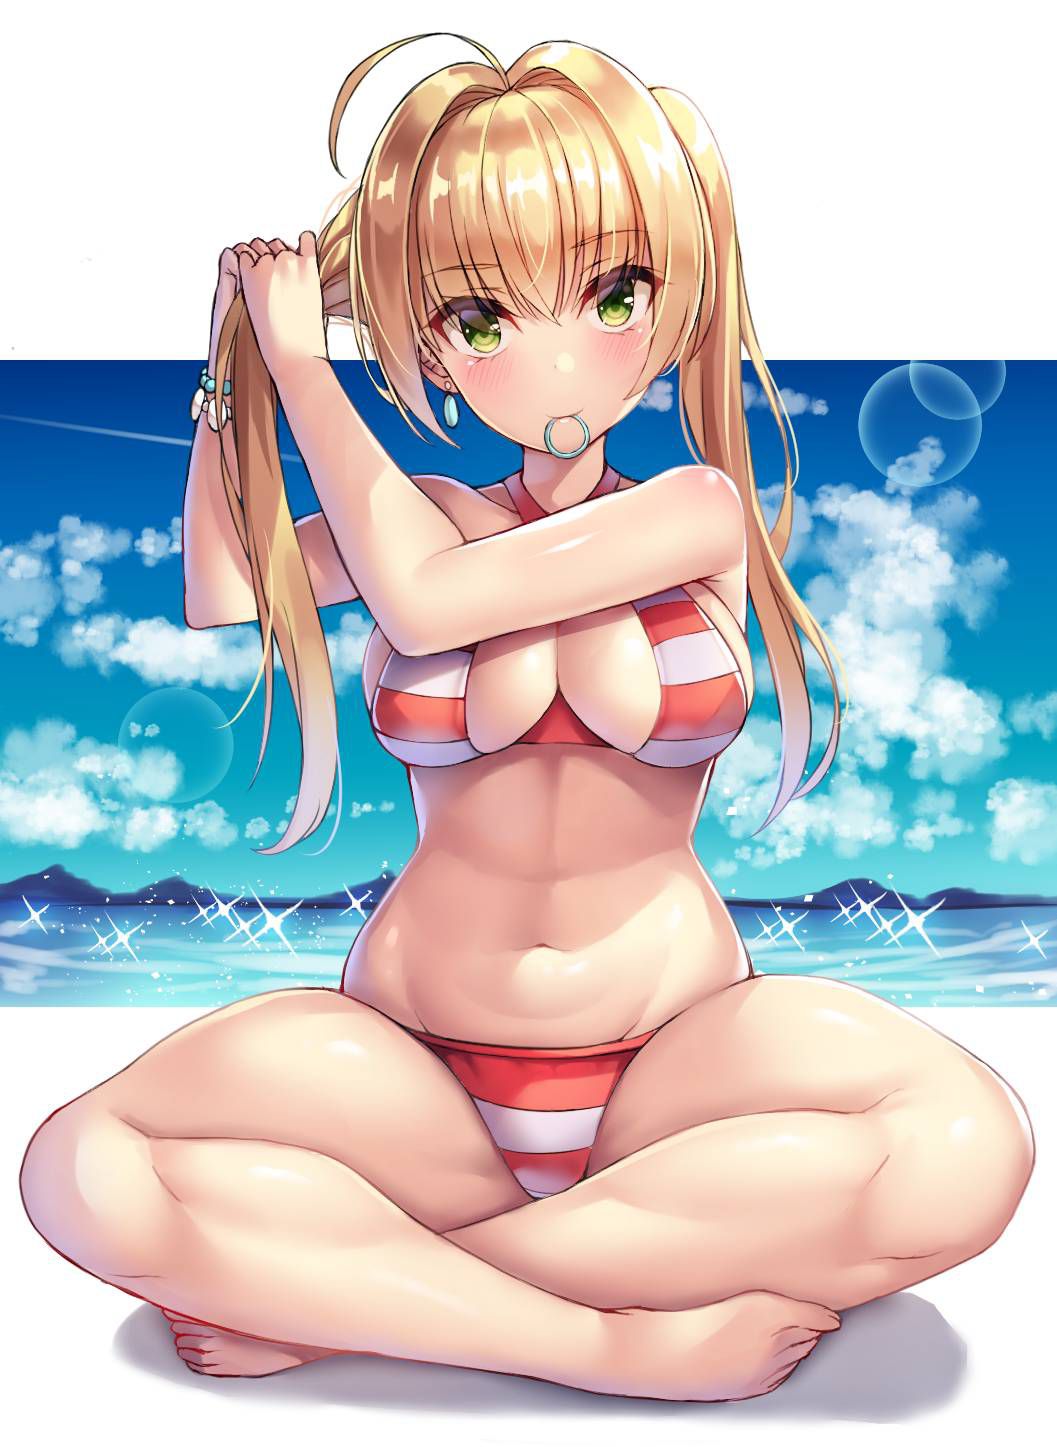 【Secondary】 Fate/Grand Order (Fate/EXTRA-CCC), Nero Claudius' love images summary! No.20 [20 sheets] 6